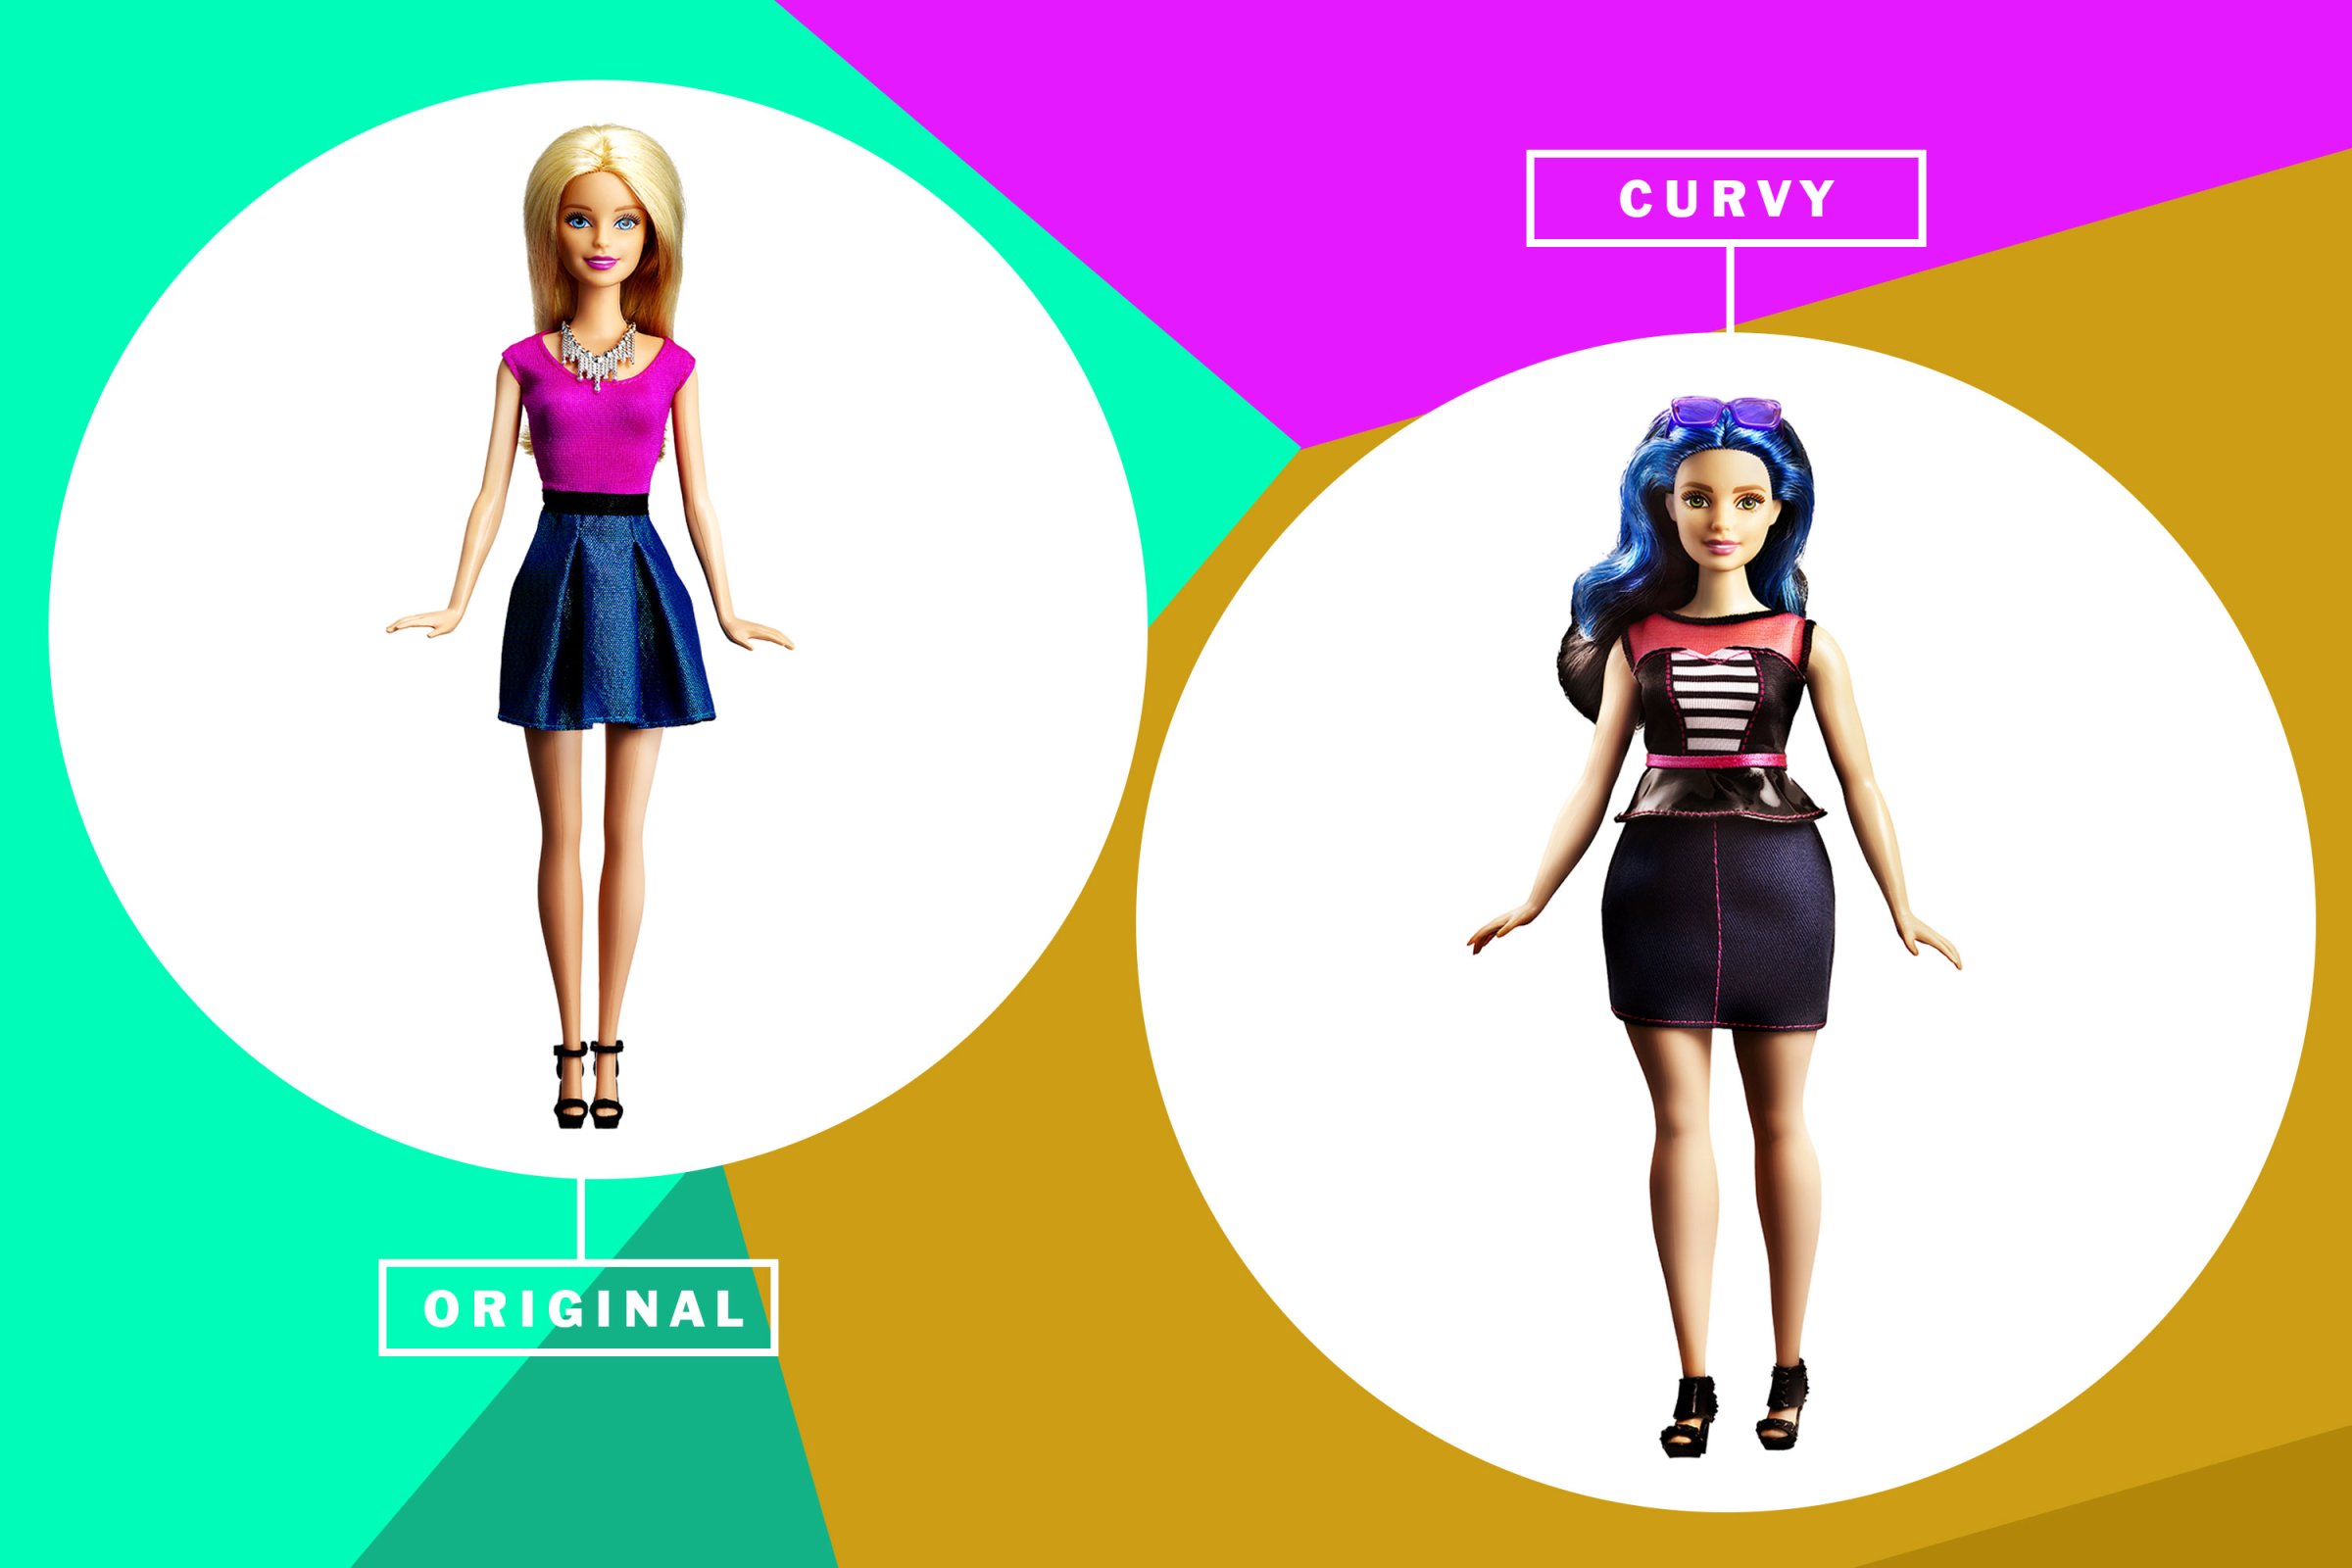 See the new Barbie bodies